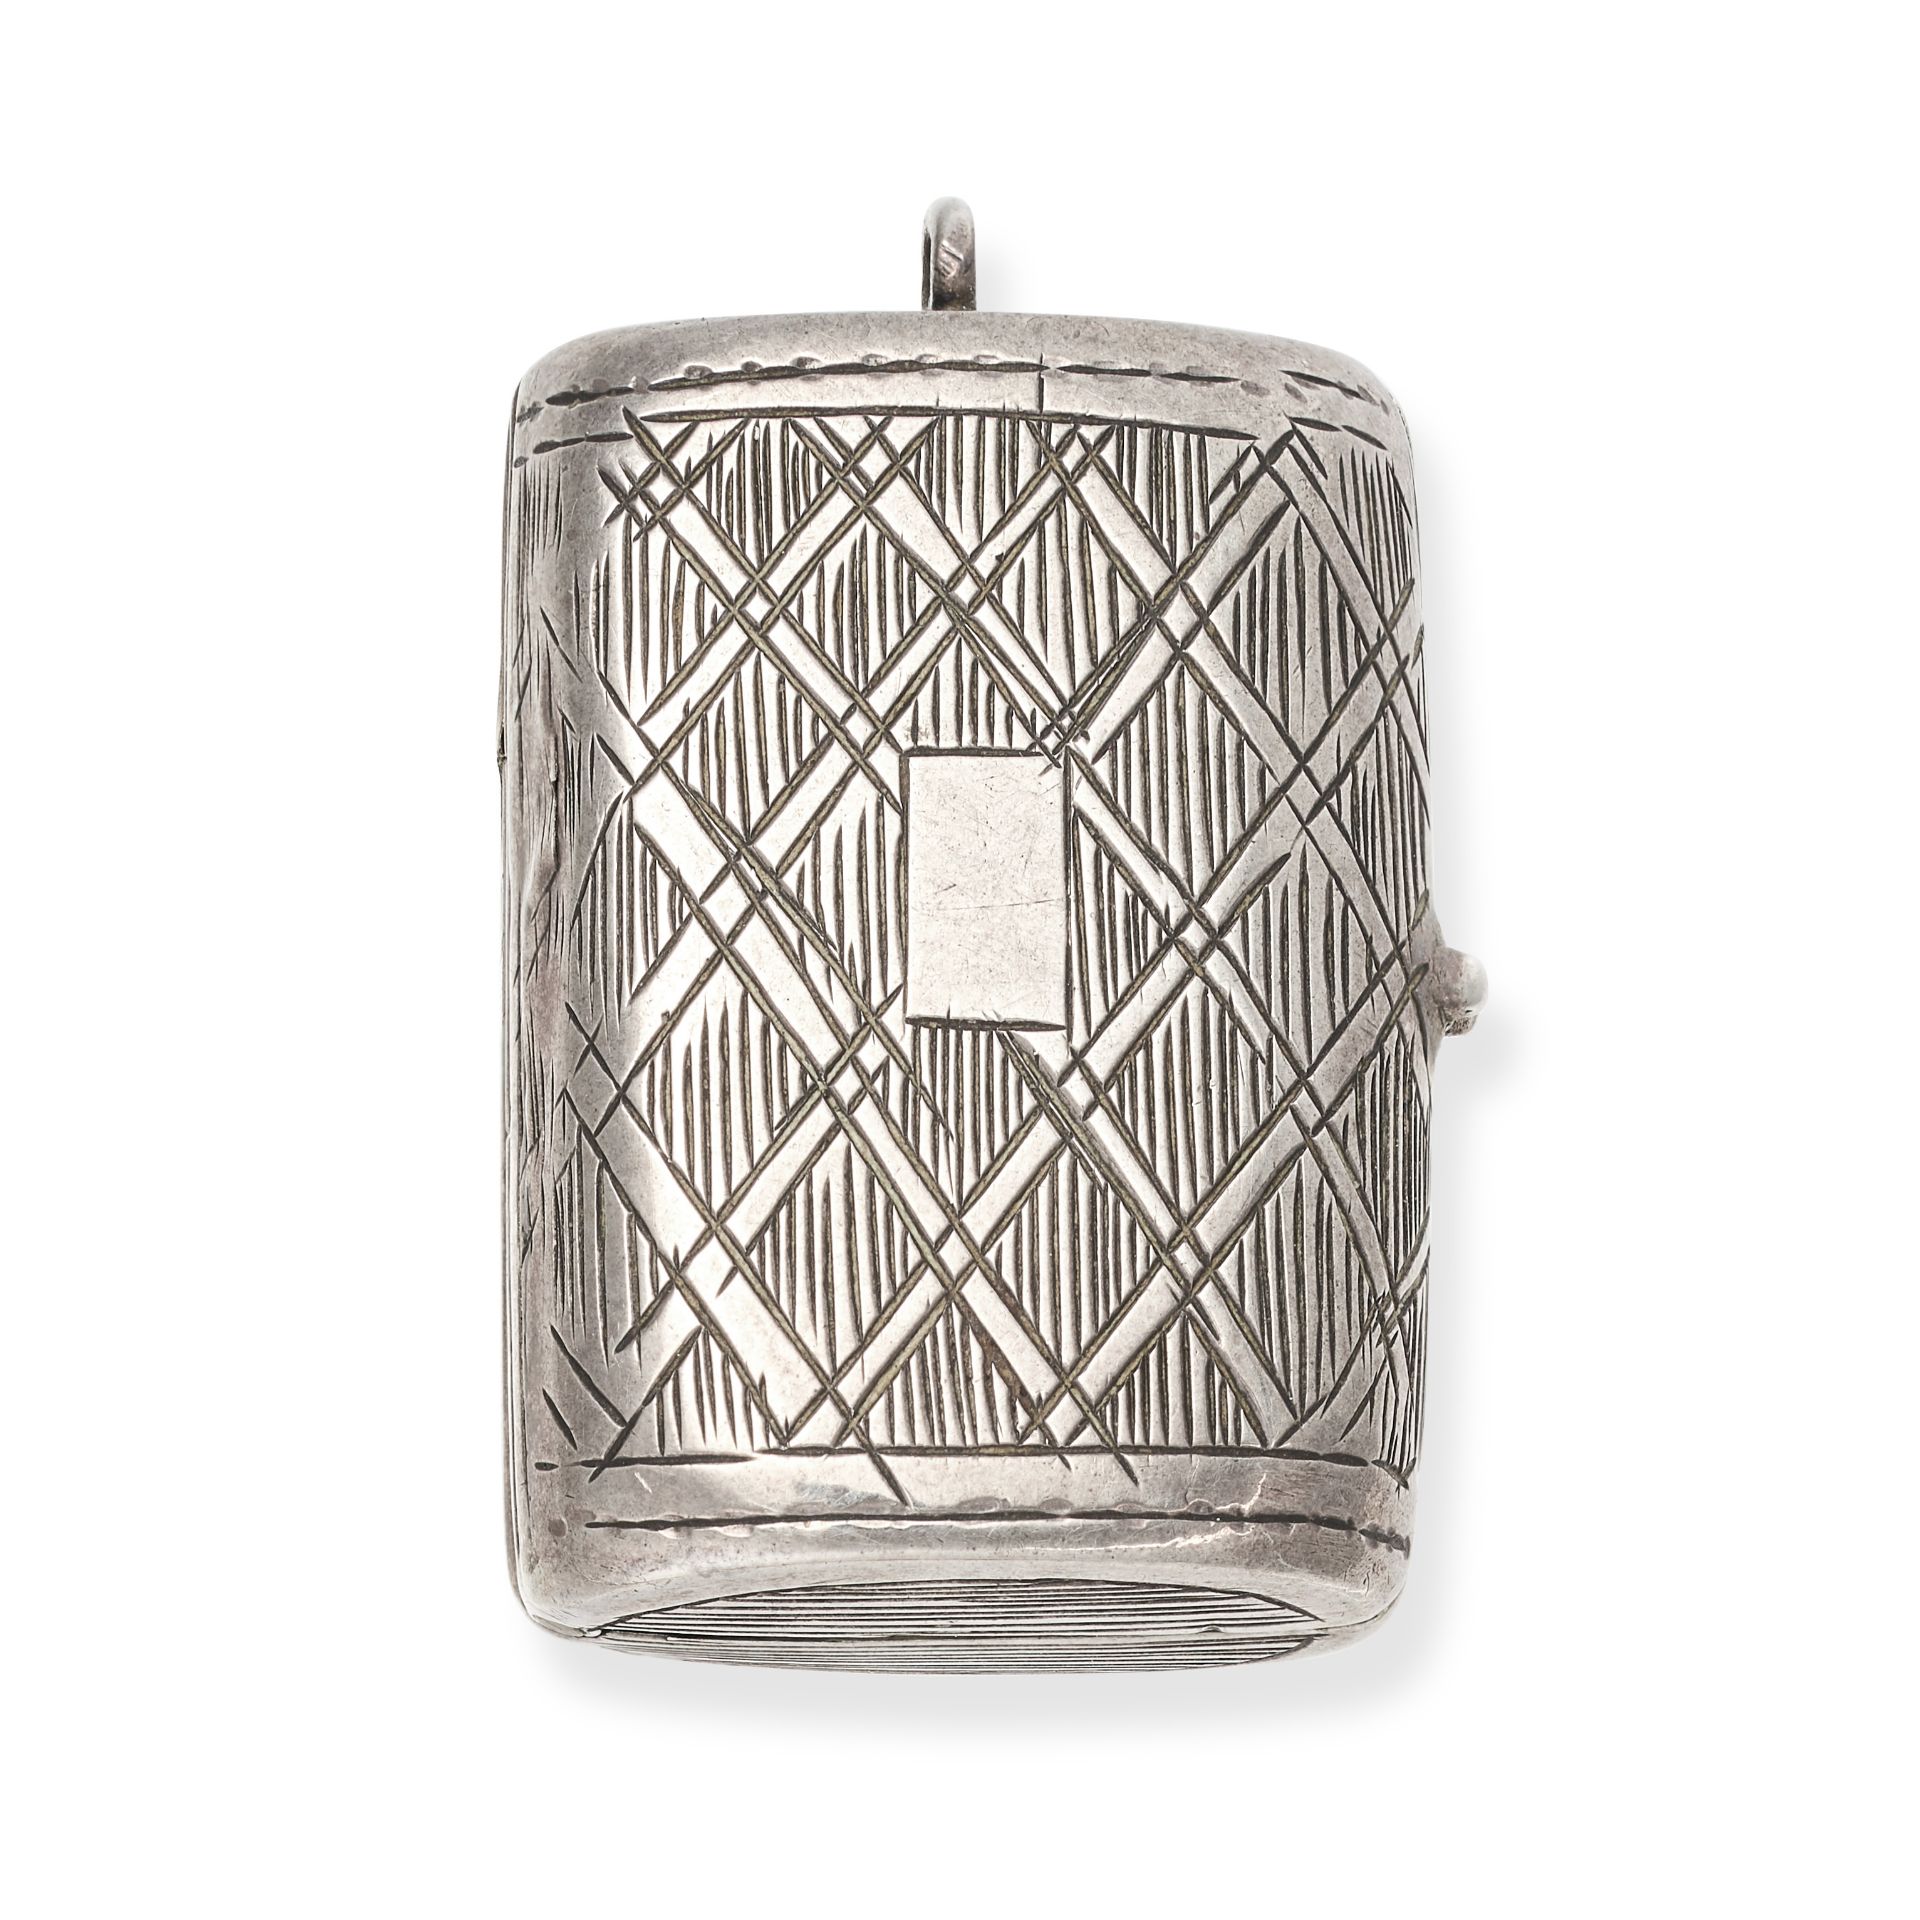 NO RESERVE - A RUSSIAN ANTIQUE SILVER VINAIGRETTE in silver gilt, the rounded rectangular body wi...